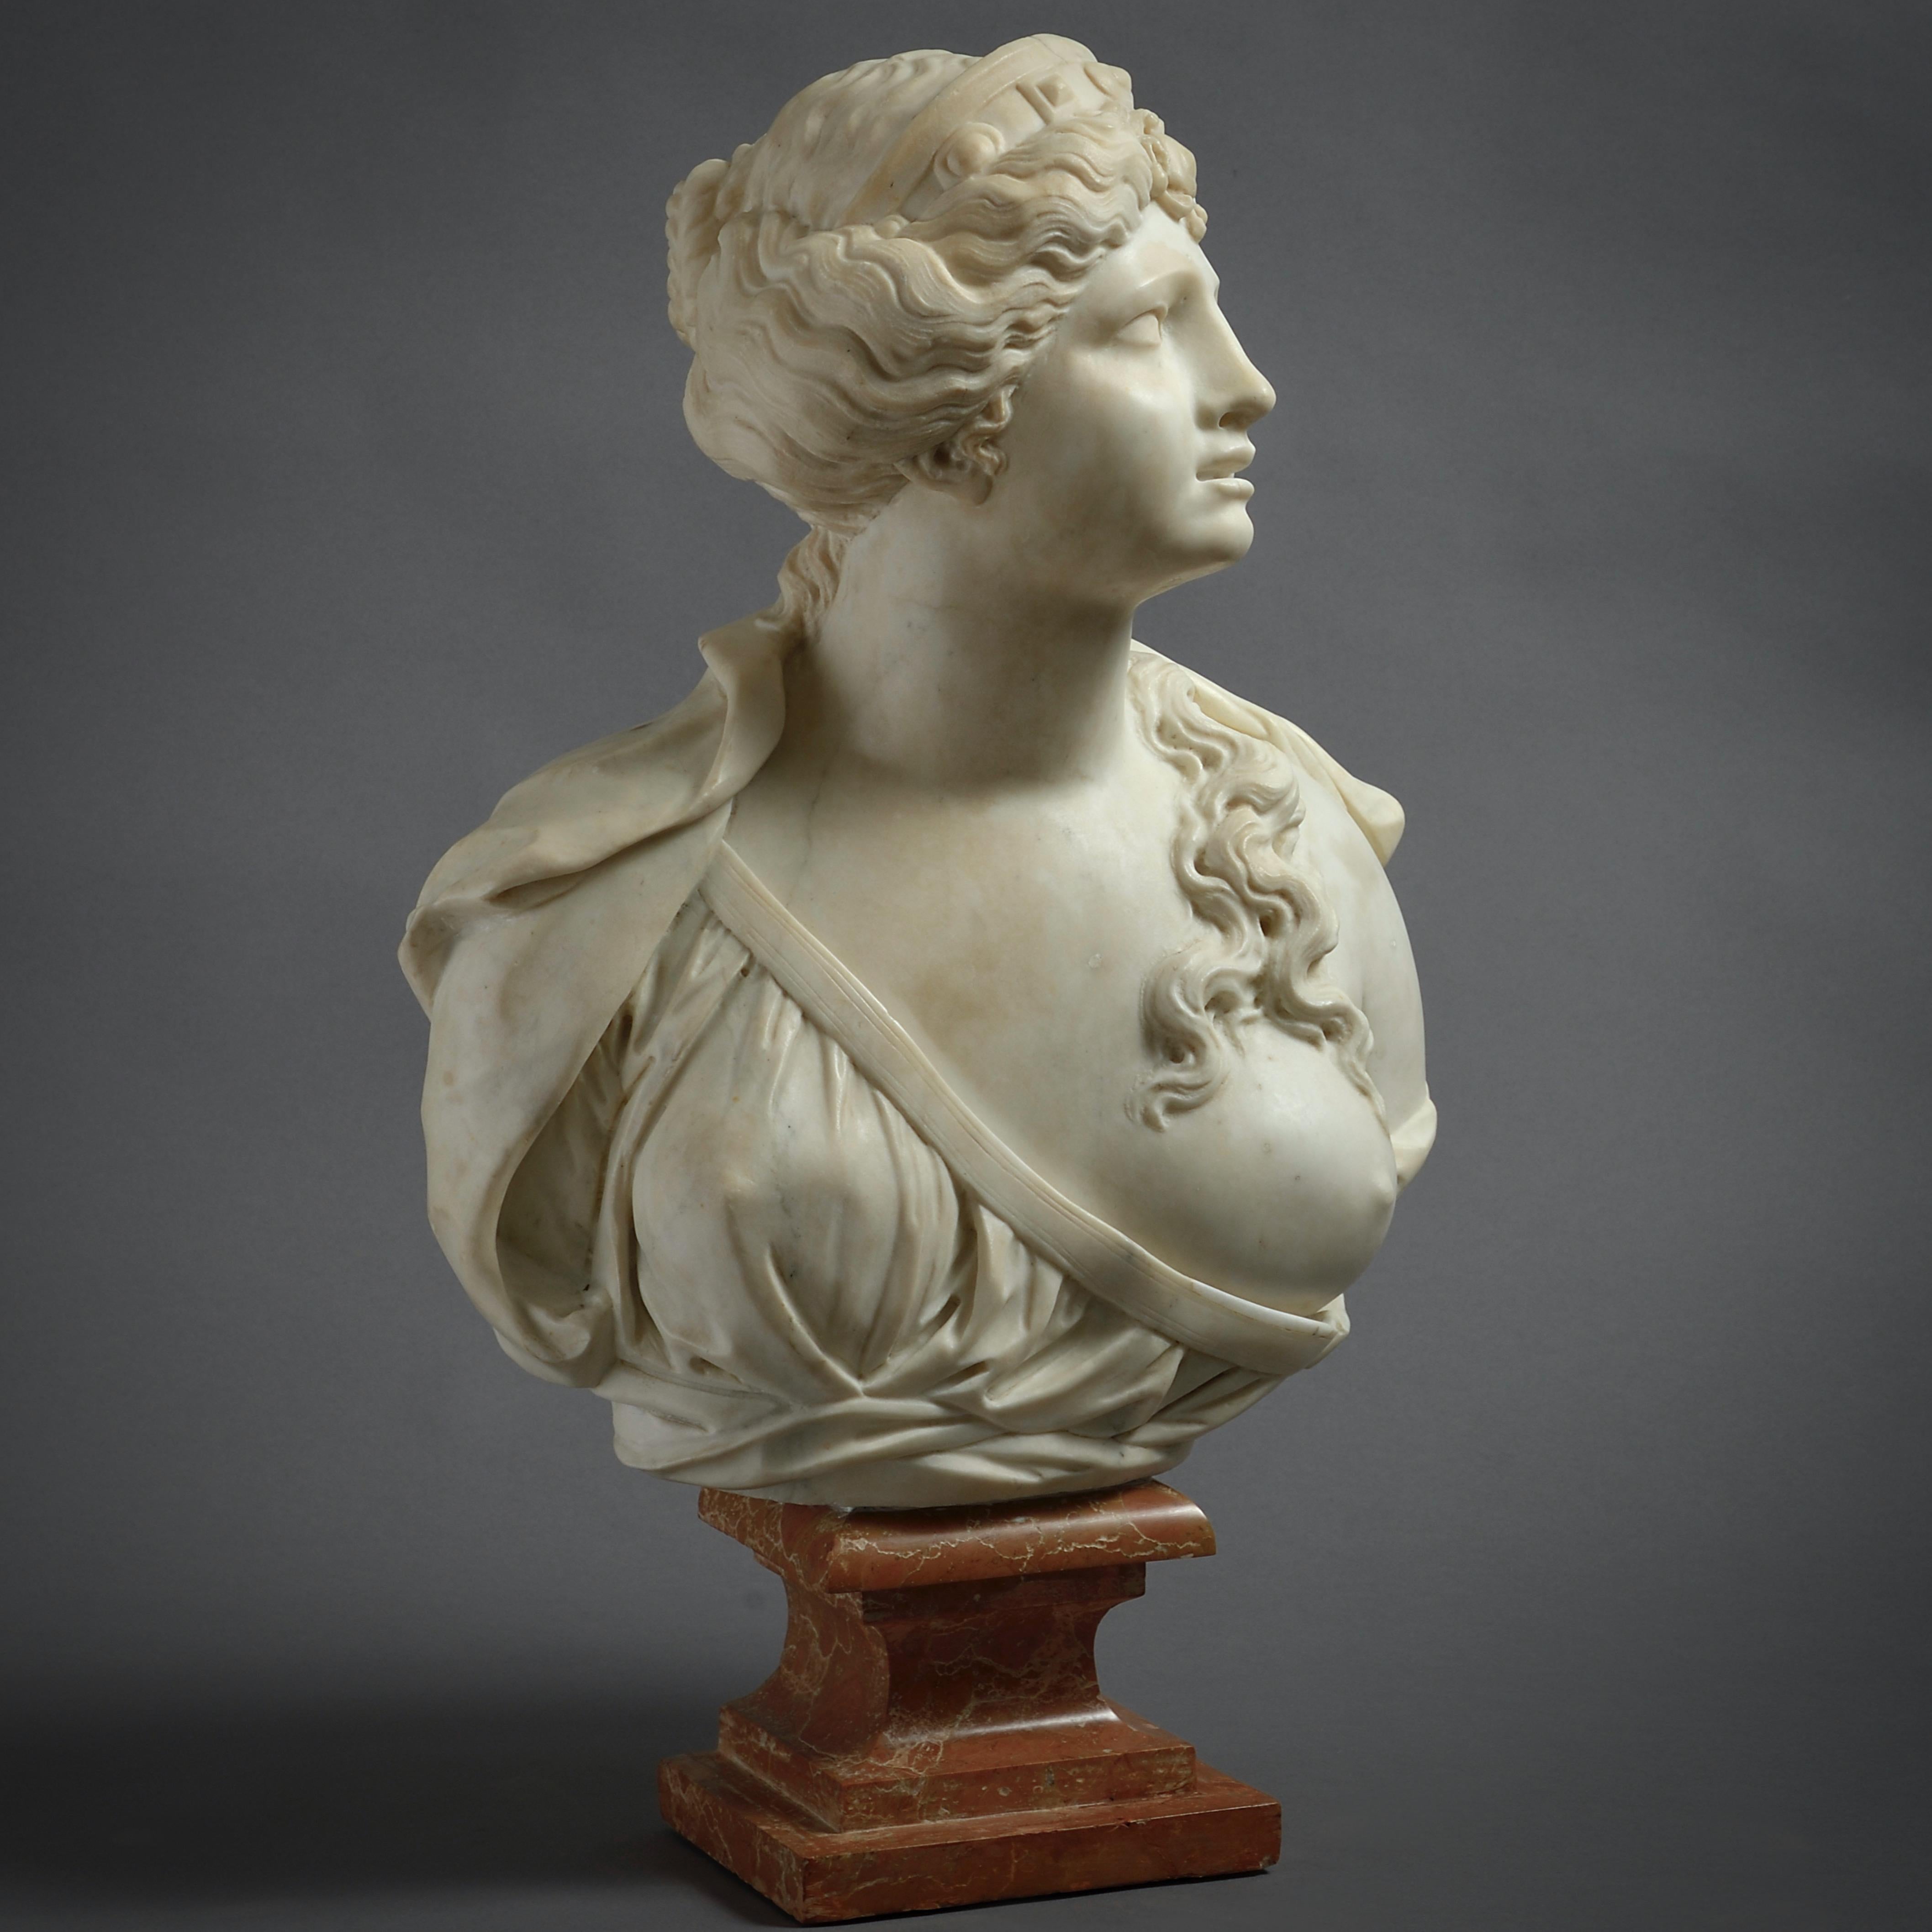 ATTRIBUTED TO TOMASSO RUES, VENICE, LATE 17TH CENTURY.

A PAIR OF STATUARY MARBLE BUSTS OF ANTIQUE HEROINES.

On late Rosso di Verona socles.

PROVENANCE:
Frédéric Spitzer Collection ;
New York, Anderson Galleries, 9-12 January 1929, Lot 554